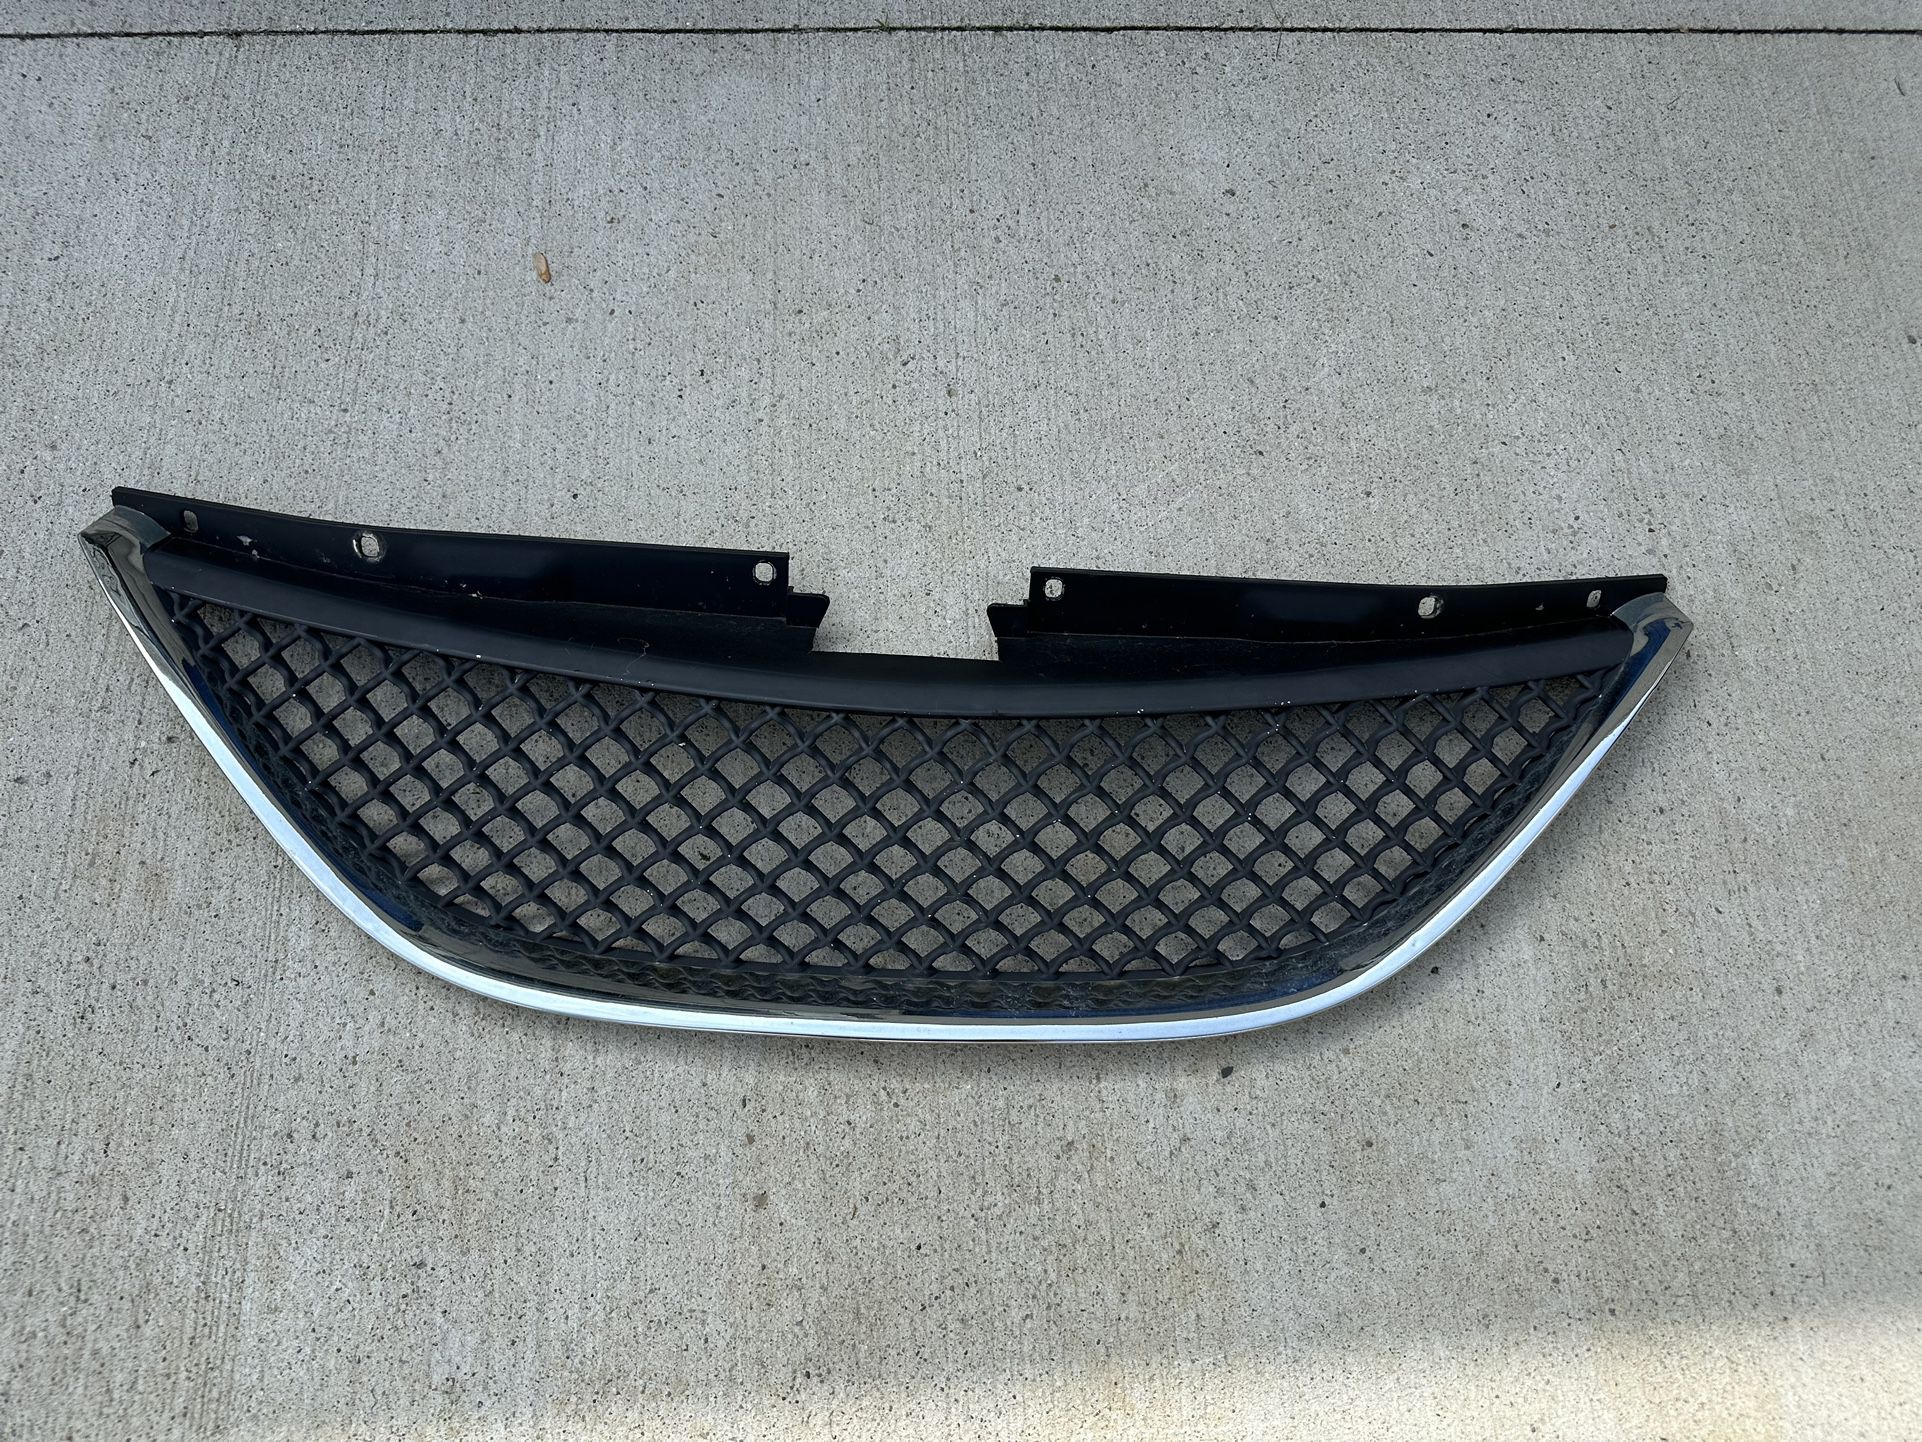 Aftermarket Front Grille For A 2011-2014 Hyundai Sonata